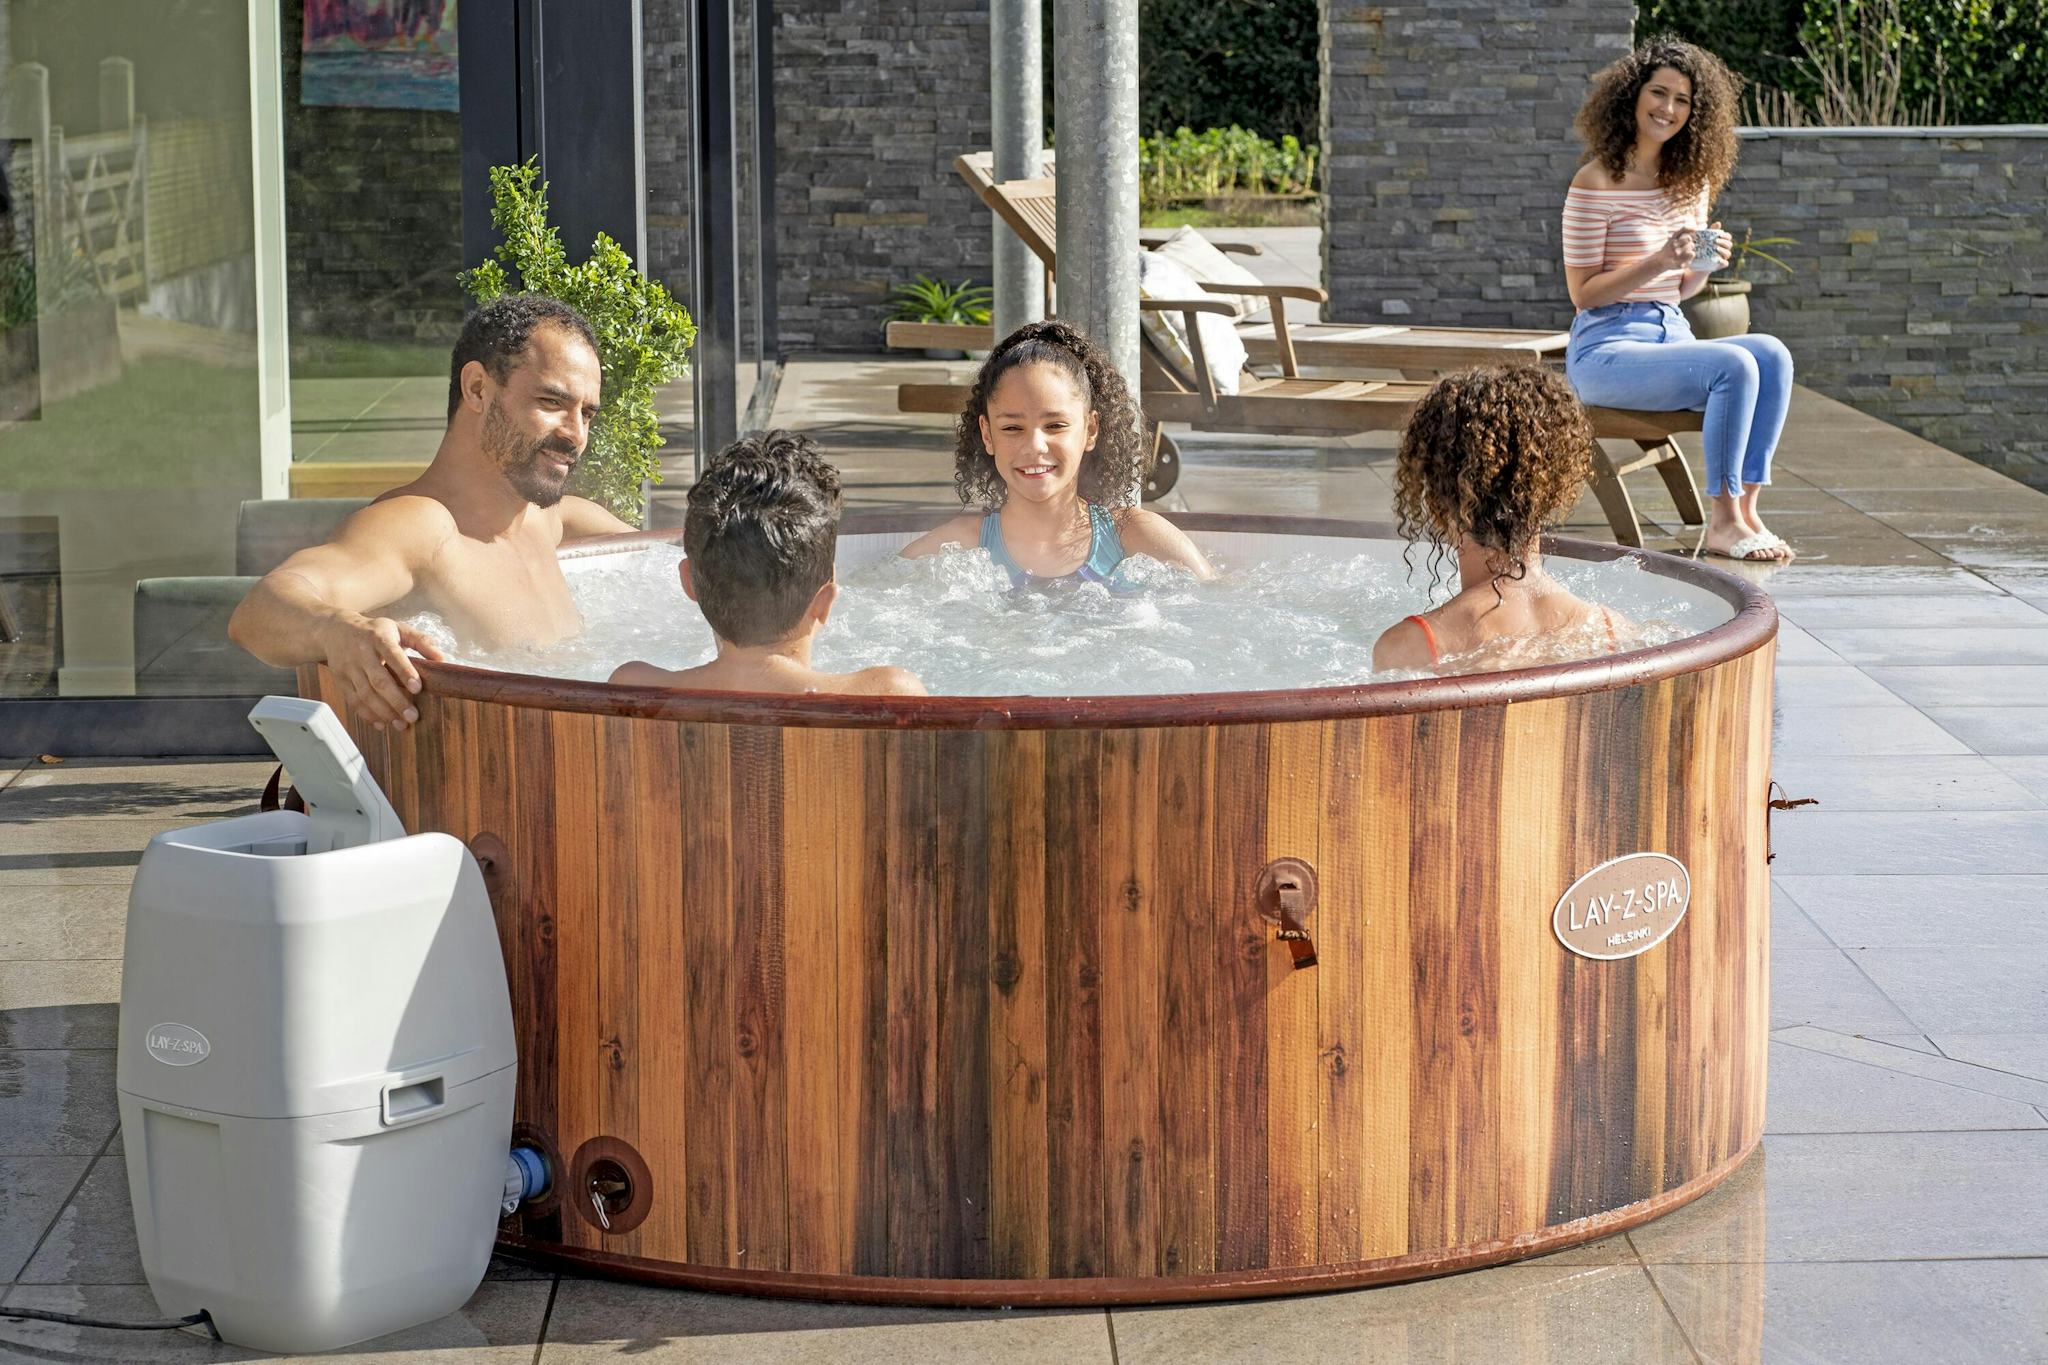 Spas Gonflables Spa gonflable rond Lay-Z-Spa® Helsinki Airjet™ 5 - 7 personnes Bestway 14